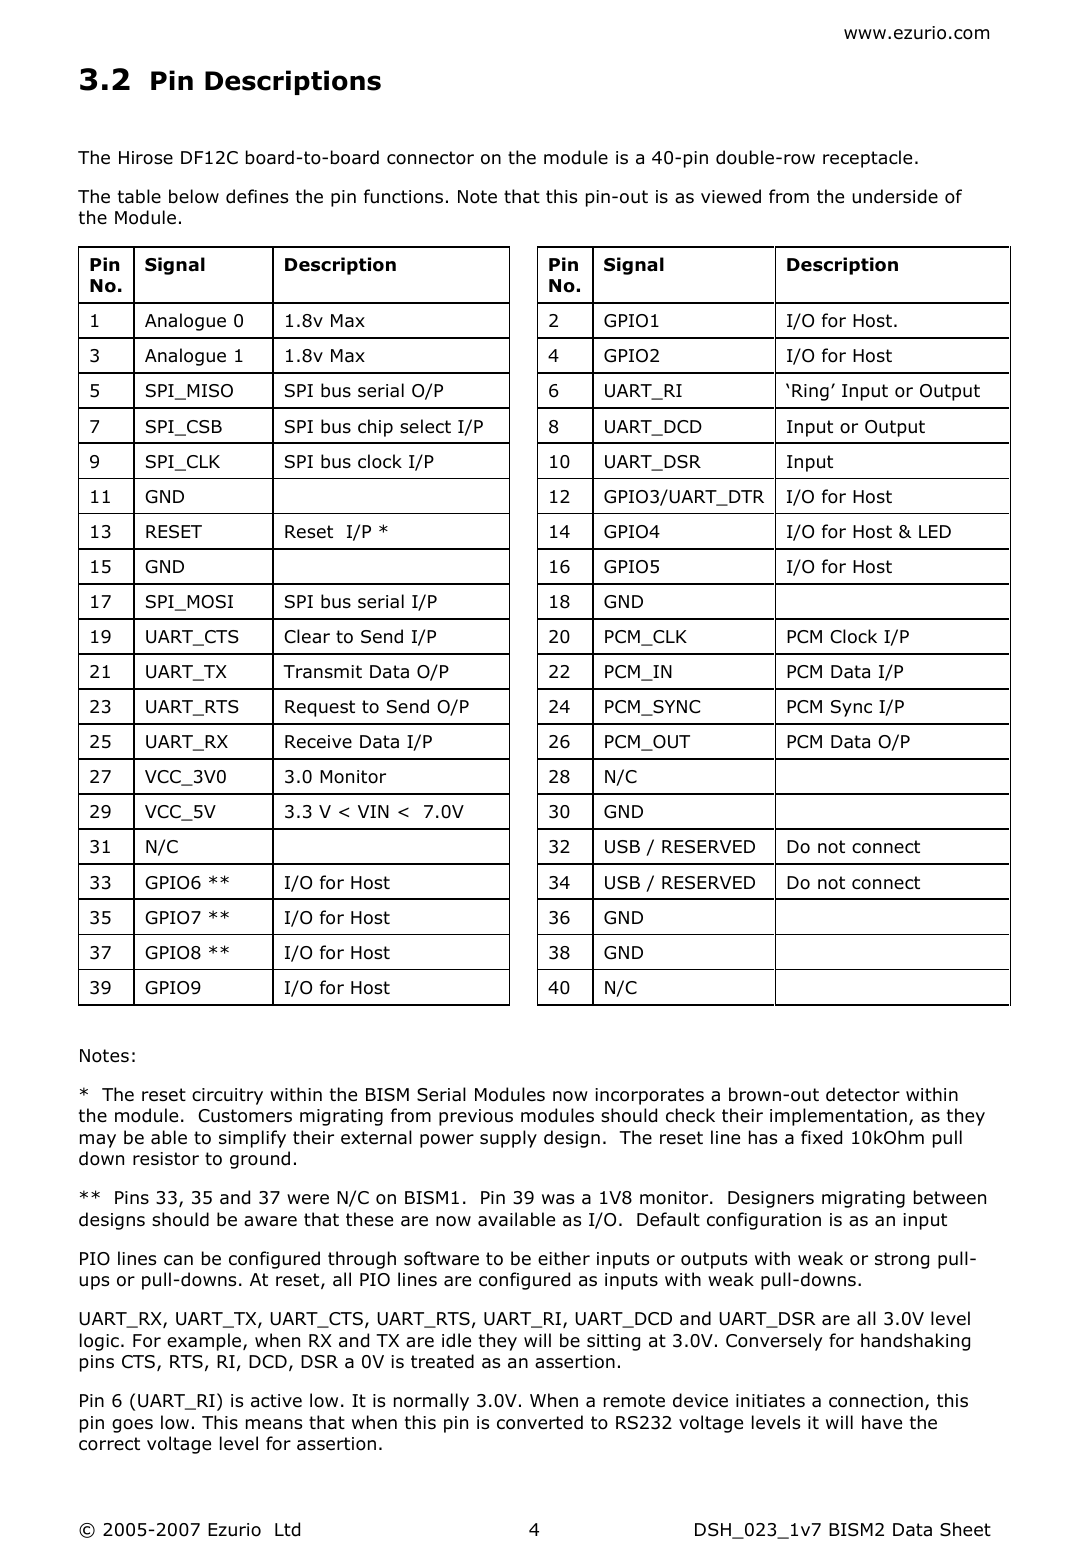 www.ezurio.com © 2005-2007 Ezurio  Ltd  DSH_023_1v7 BISM2 Data Sheet  4 3.2 Pin Descriptions  The Hirose DF12C board-to-board connector on the module is a 40-pin double-row receptacle.  The table below defines the pin functions. Note that this pin-out is as viewed from the underside of the Module.  Pin No. Signal  Description    Pin No. Signal  Description 1  Analogue 0  1.8v Max    2  GPIO1  I/O for Host. 3  Analogue 1  1.8v Max    4  GPIO2  I/O for Host 5  SPI_MISO  SPI bus serial O/P    6  UART_RI  ‘Ring’ Input or Output 7  SPI_CSB  SPI bus chip select I/P    8  UART_DCD  Input or Output  9  SPI_CLK  SPI bus clock I/P    10  UART_DSR  Input  11  GND      12  GPIO3/UART_DTR I/O for Host 13  RESET  Reset  I/P *    14  GPIO4  I/O for Host &amp; LED 15  GND      16  GPIO5  I/O for Host 17  SPI_MOSI  SPI bus serial I/P    18  GND   19  UART_CTS  Clear to Send I/P    20  PCM_CLK  PCM Clock I/P 21  UART_TX  Transmit Data O/P    22  PCM_IN  PCM Data I/P 23  UART_RTS  Request to Send O/P    24  PCM_SYNC  PCM Sync I/P 25  UART_RX  Receive Data I/P    26  PCM_OUT  PCM Data O/P 27  VCC_3V0  3.0 Monitor    28  N/C   29  VCC_5V  3.3 V &lt; VIN &lt;  7.0V    30  GND   31  N/C      32  USB / RESERVED  Do not connect 33  GPIO6 **  I/O for Host    34  USB / RESERVED  Do not connect 35  GPIO7 **  I/O for Host    36  GND   37  GPIO8 **  I/O for Host    38  GND   39  GPIO9  I/O for Host    40  N/C    Notes: *  The reset circuitry within the BISM Serial Modules now incorporates a brown-out detector within the module.  Customers migrating from previous modules should check their implementation, as they may be able to simplify their external power supply design.  The reset line has a fixed 10kOhm pull down resistor to ground. **  Pins 33, 35 and 37 were N/C on BISM1.  Pin 39 was a 1V8 monitor.  Designers migrating between designs should be aware that these are now available as I/O.  Default configuration is as an input PIO lines can be configured through software to be either inputs or outputs with weak or strong pull-ups or pull-downs. At reset, all PIO lines are configured as inputs with weak pull-downs. UART_RX, UART_TX, UART_CTS, UART_RTS, UART_RI, UART_DCD and UART_DSR are all 3.0V level logic. For example, when RX and TX are idle they will be sitting at 3.0V. Conversely for handshaking pins CTS, RTS, RI, DCD, DSR a 0V is treated as an assertion. Pin 6 (UART_RI) is active low. It is normally 3.0V. When a remote device initiates a connection, this pin goes low. This means that when this pin is converted to RS232 voltage levels it will have the correct voltage level for assertion. 